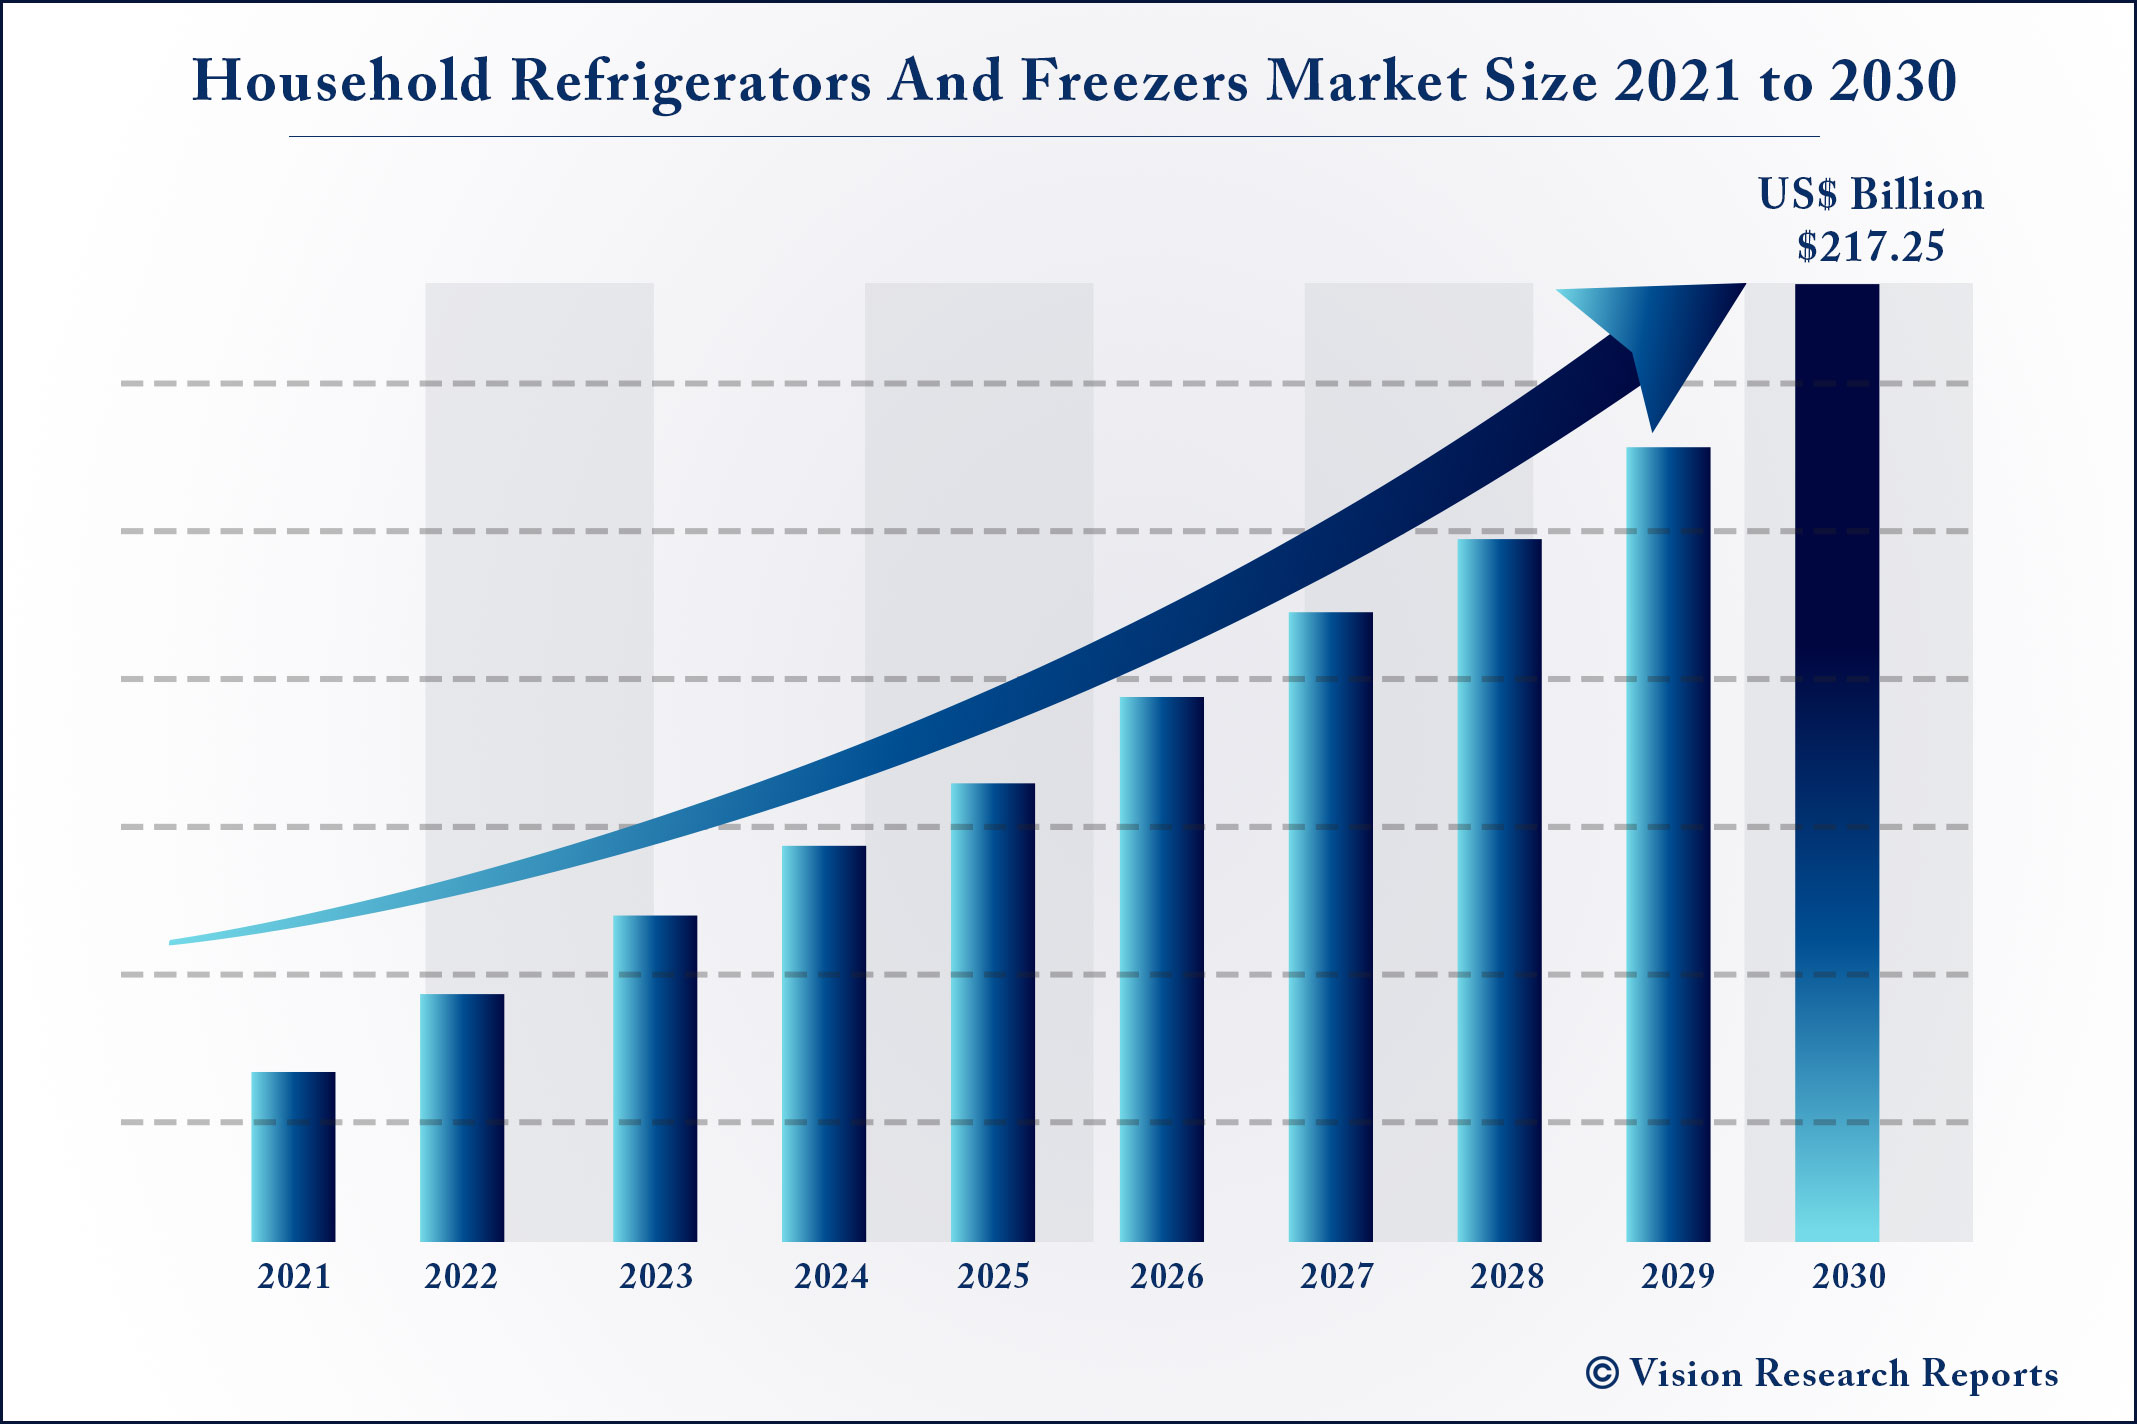 Household Refrigerators And Freezers Market Size 2021 to 2030